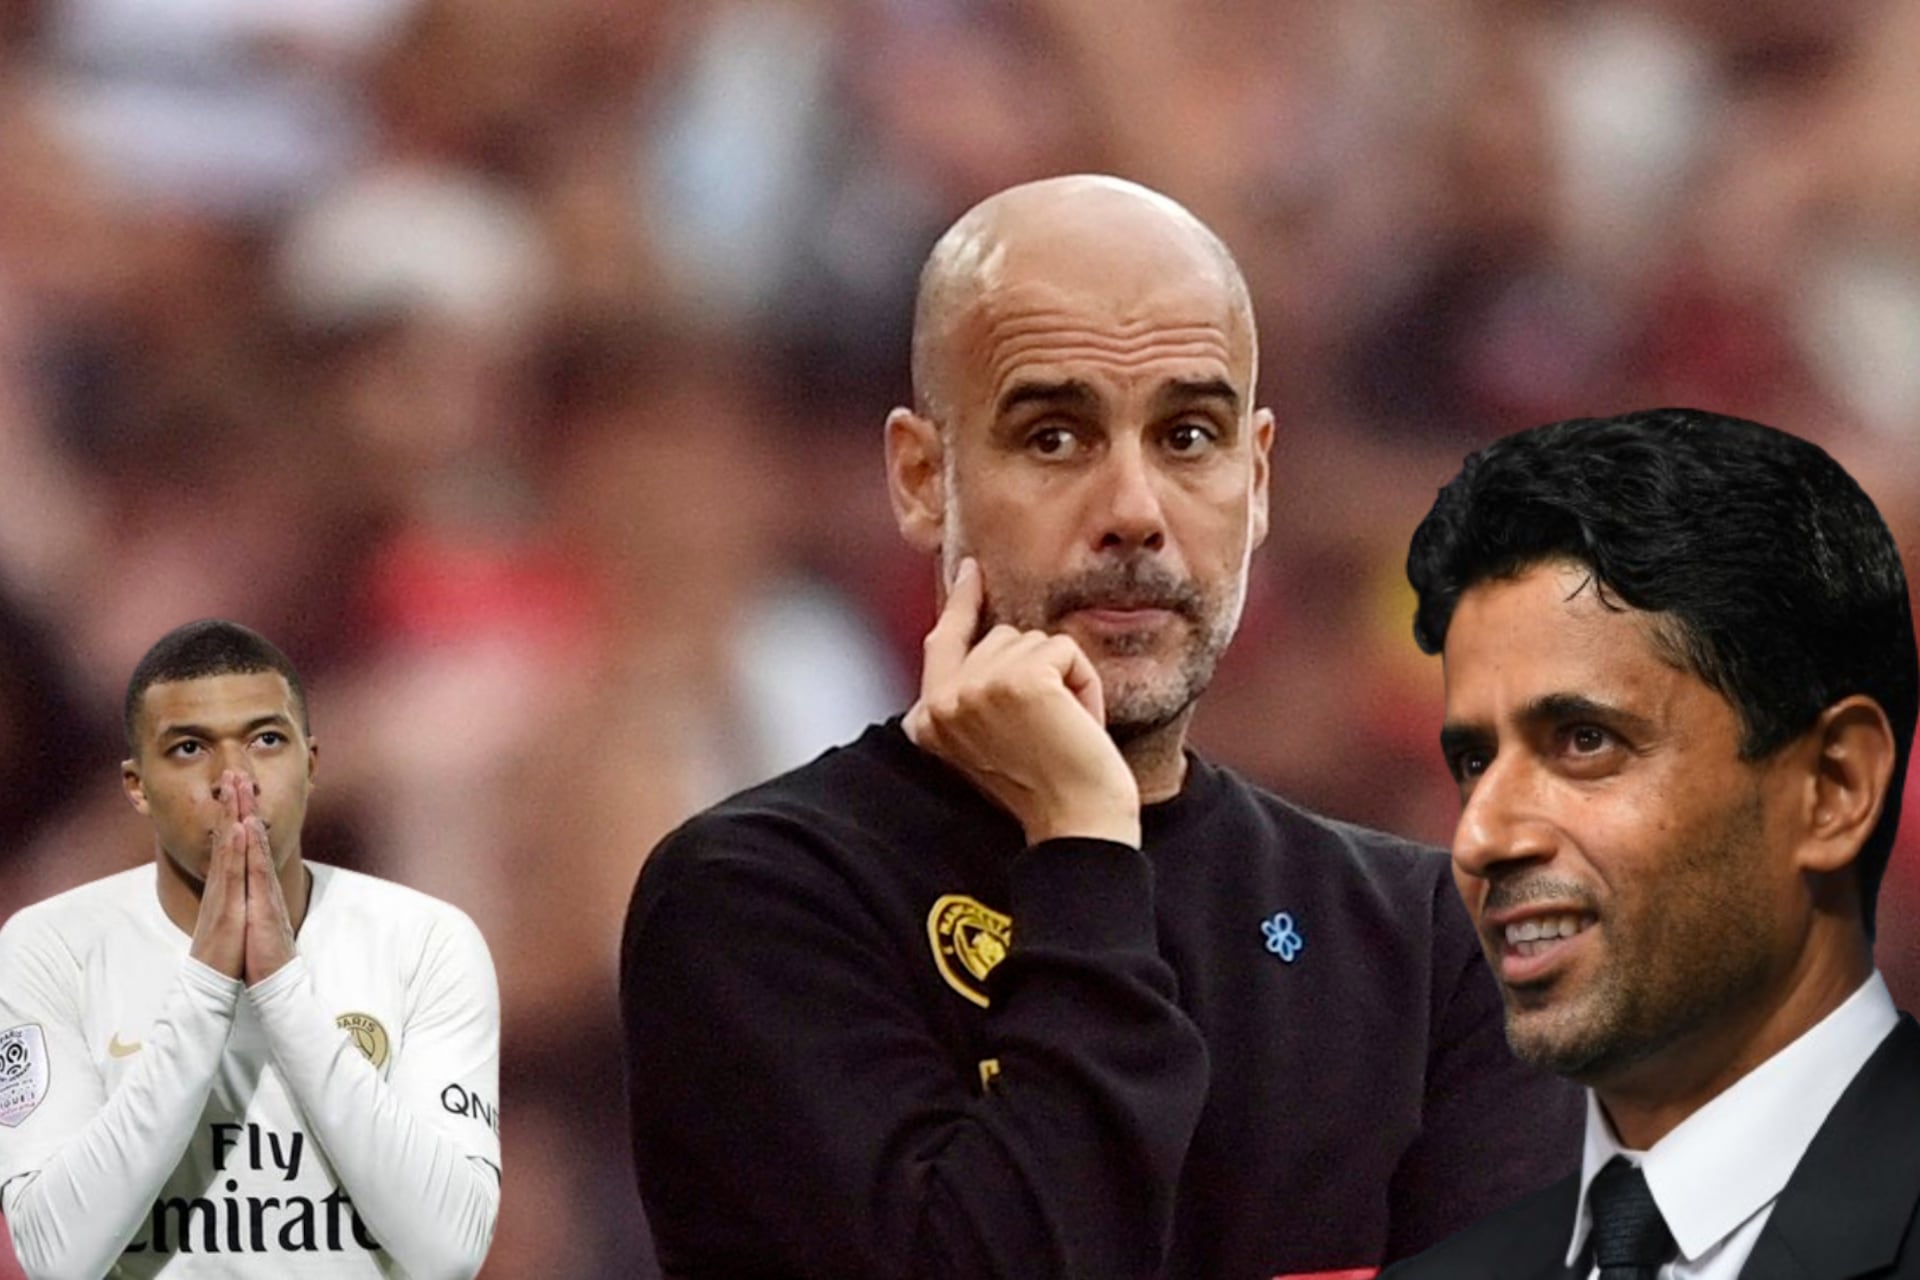 PSG forget about Mbappé and want to sign Guardiola's favorite player